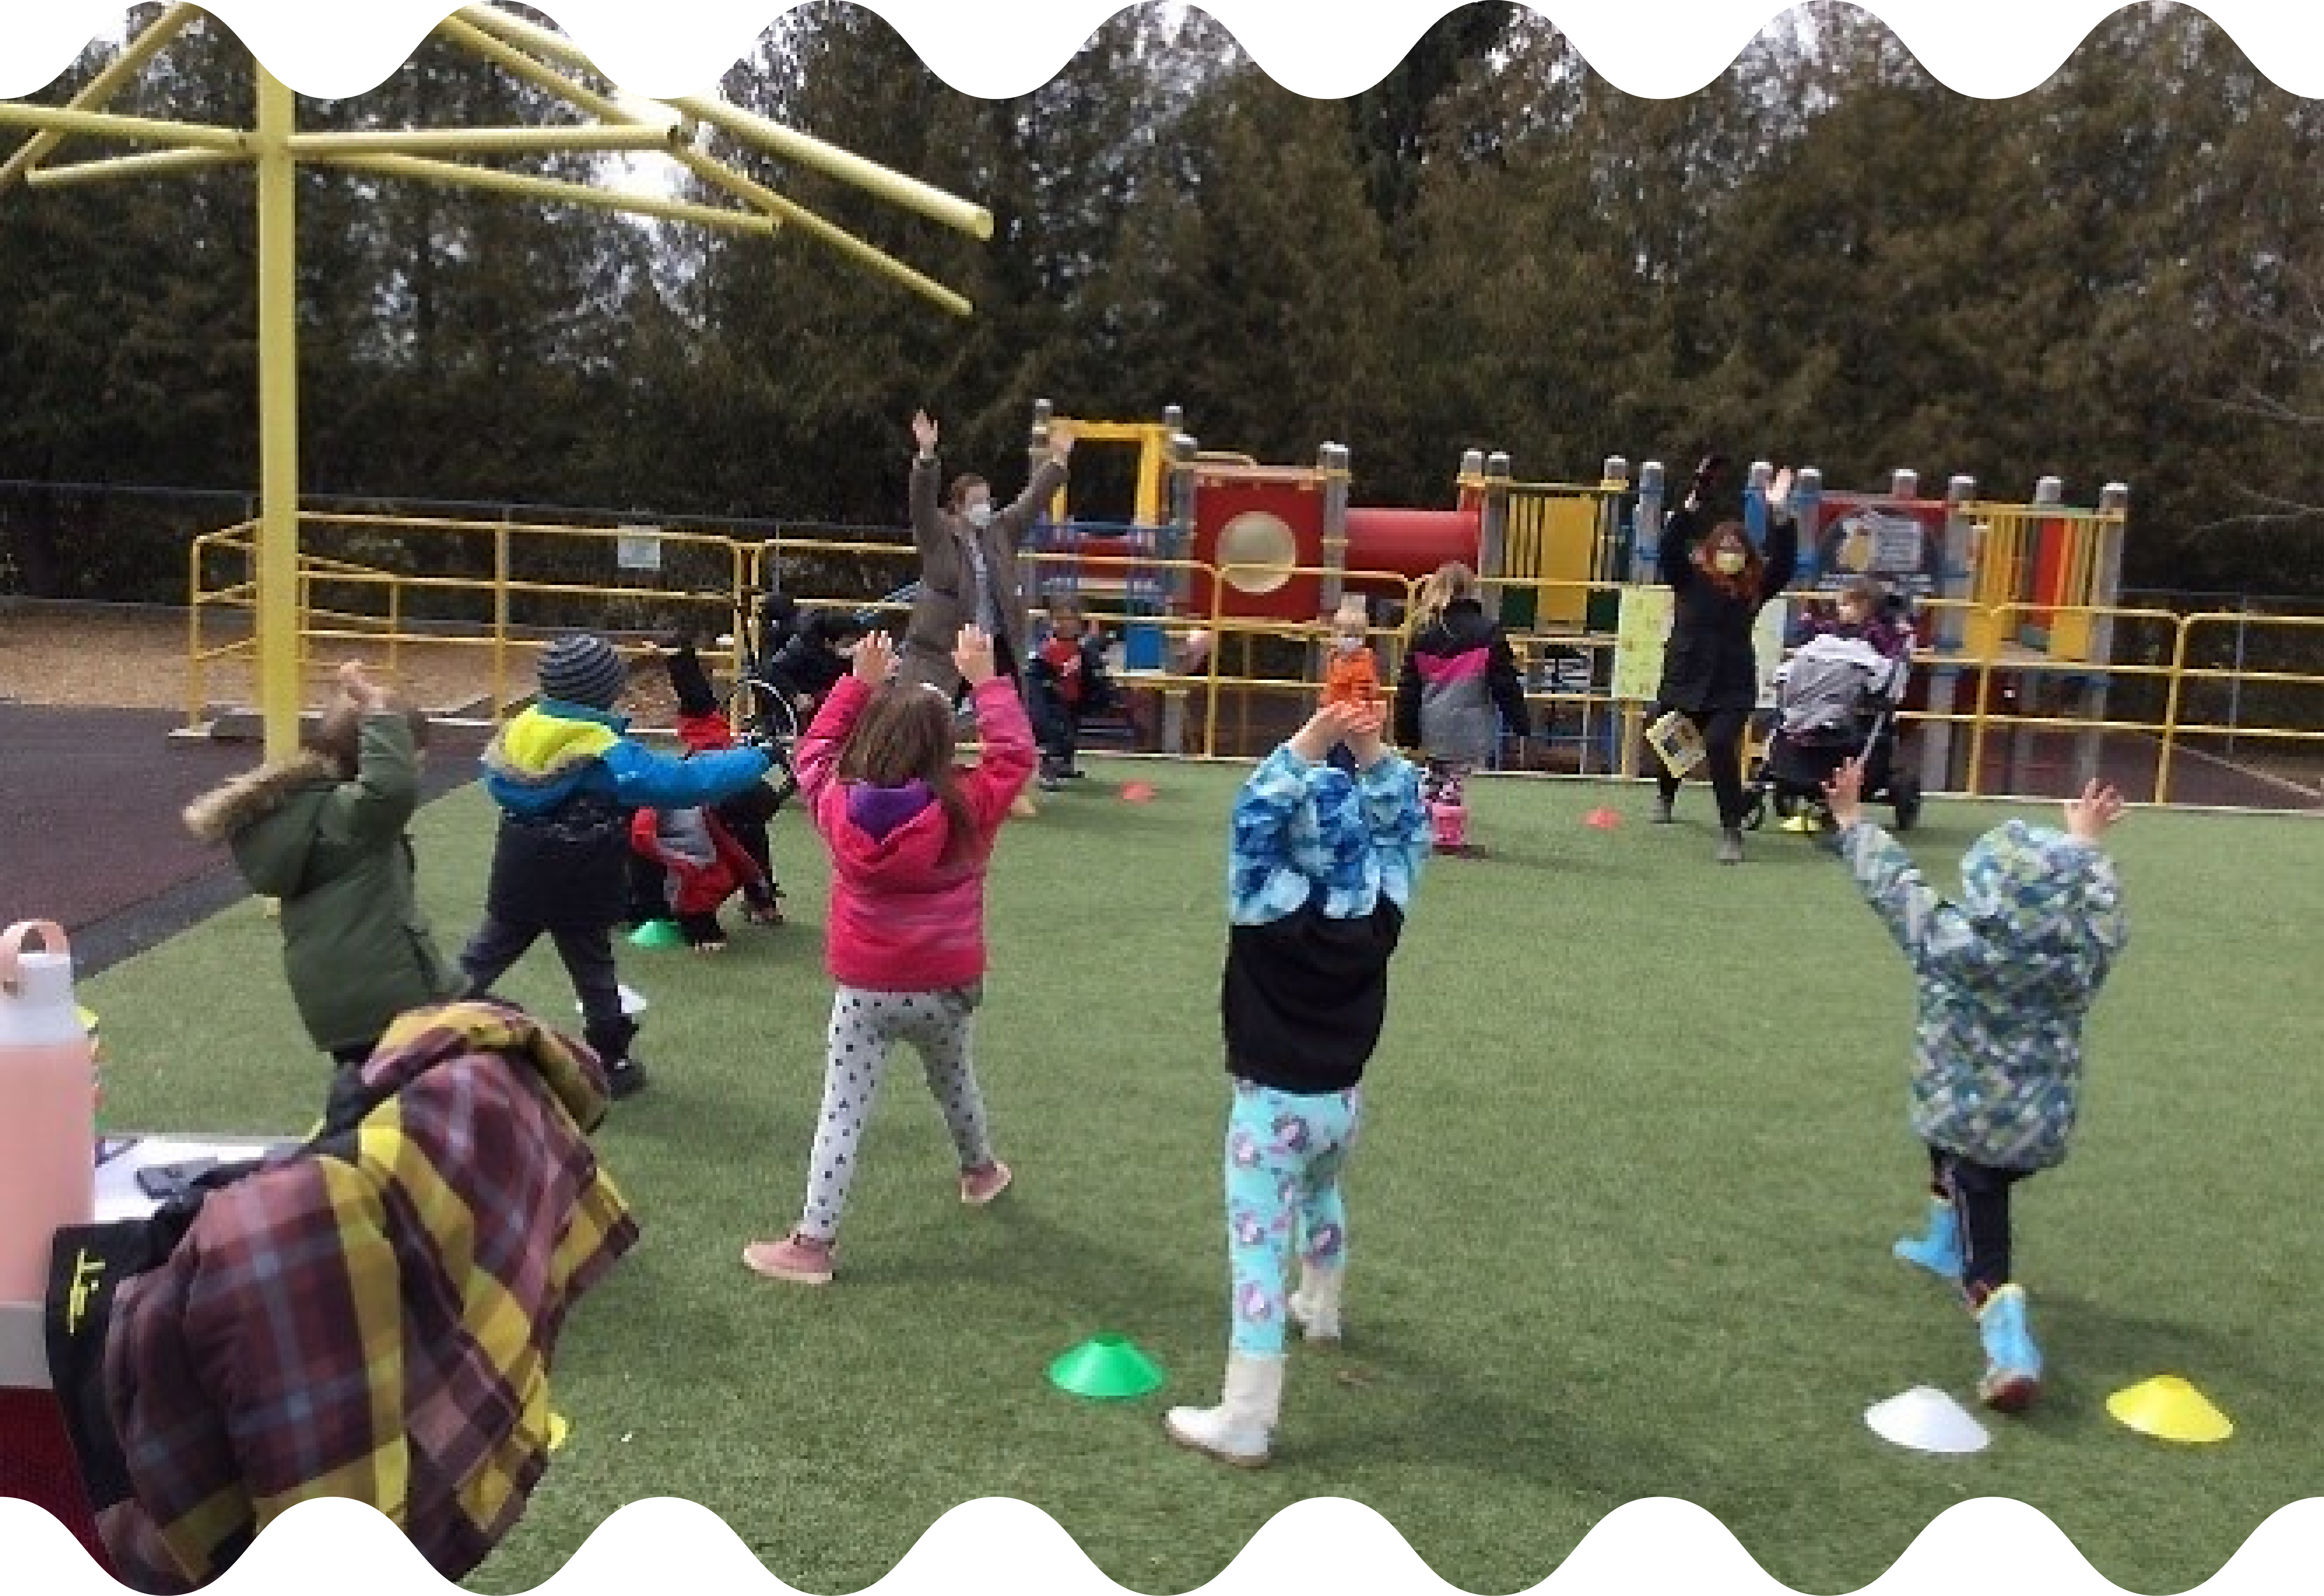 Students lunge with their hands in the air, participating in fun outdoor activities.